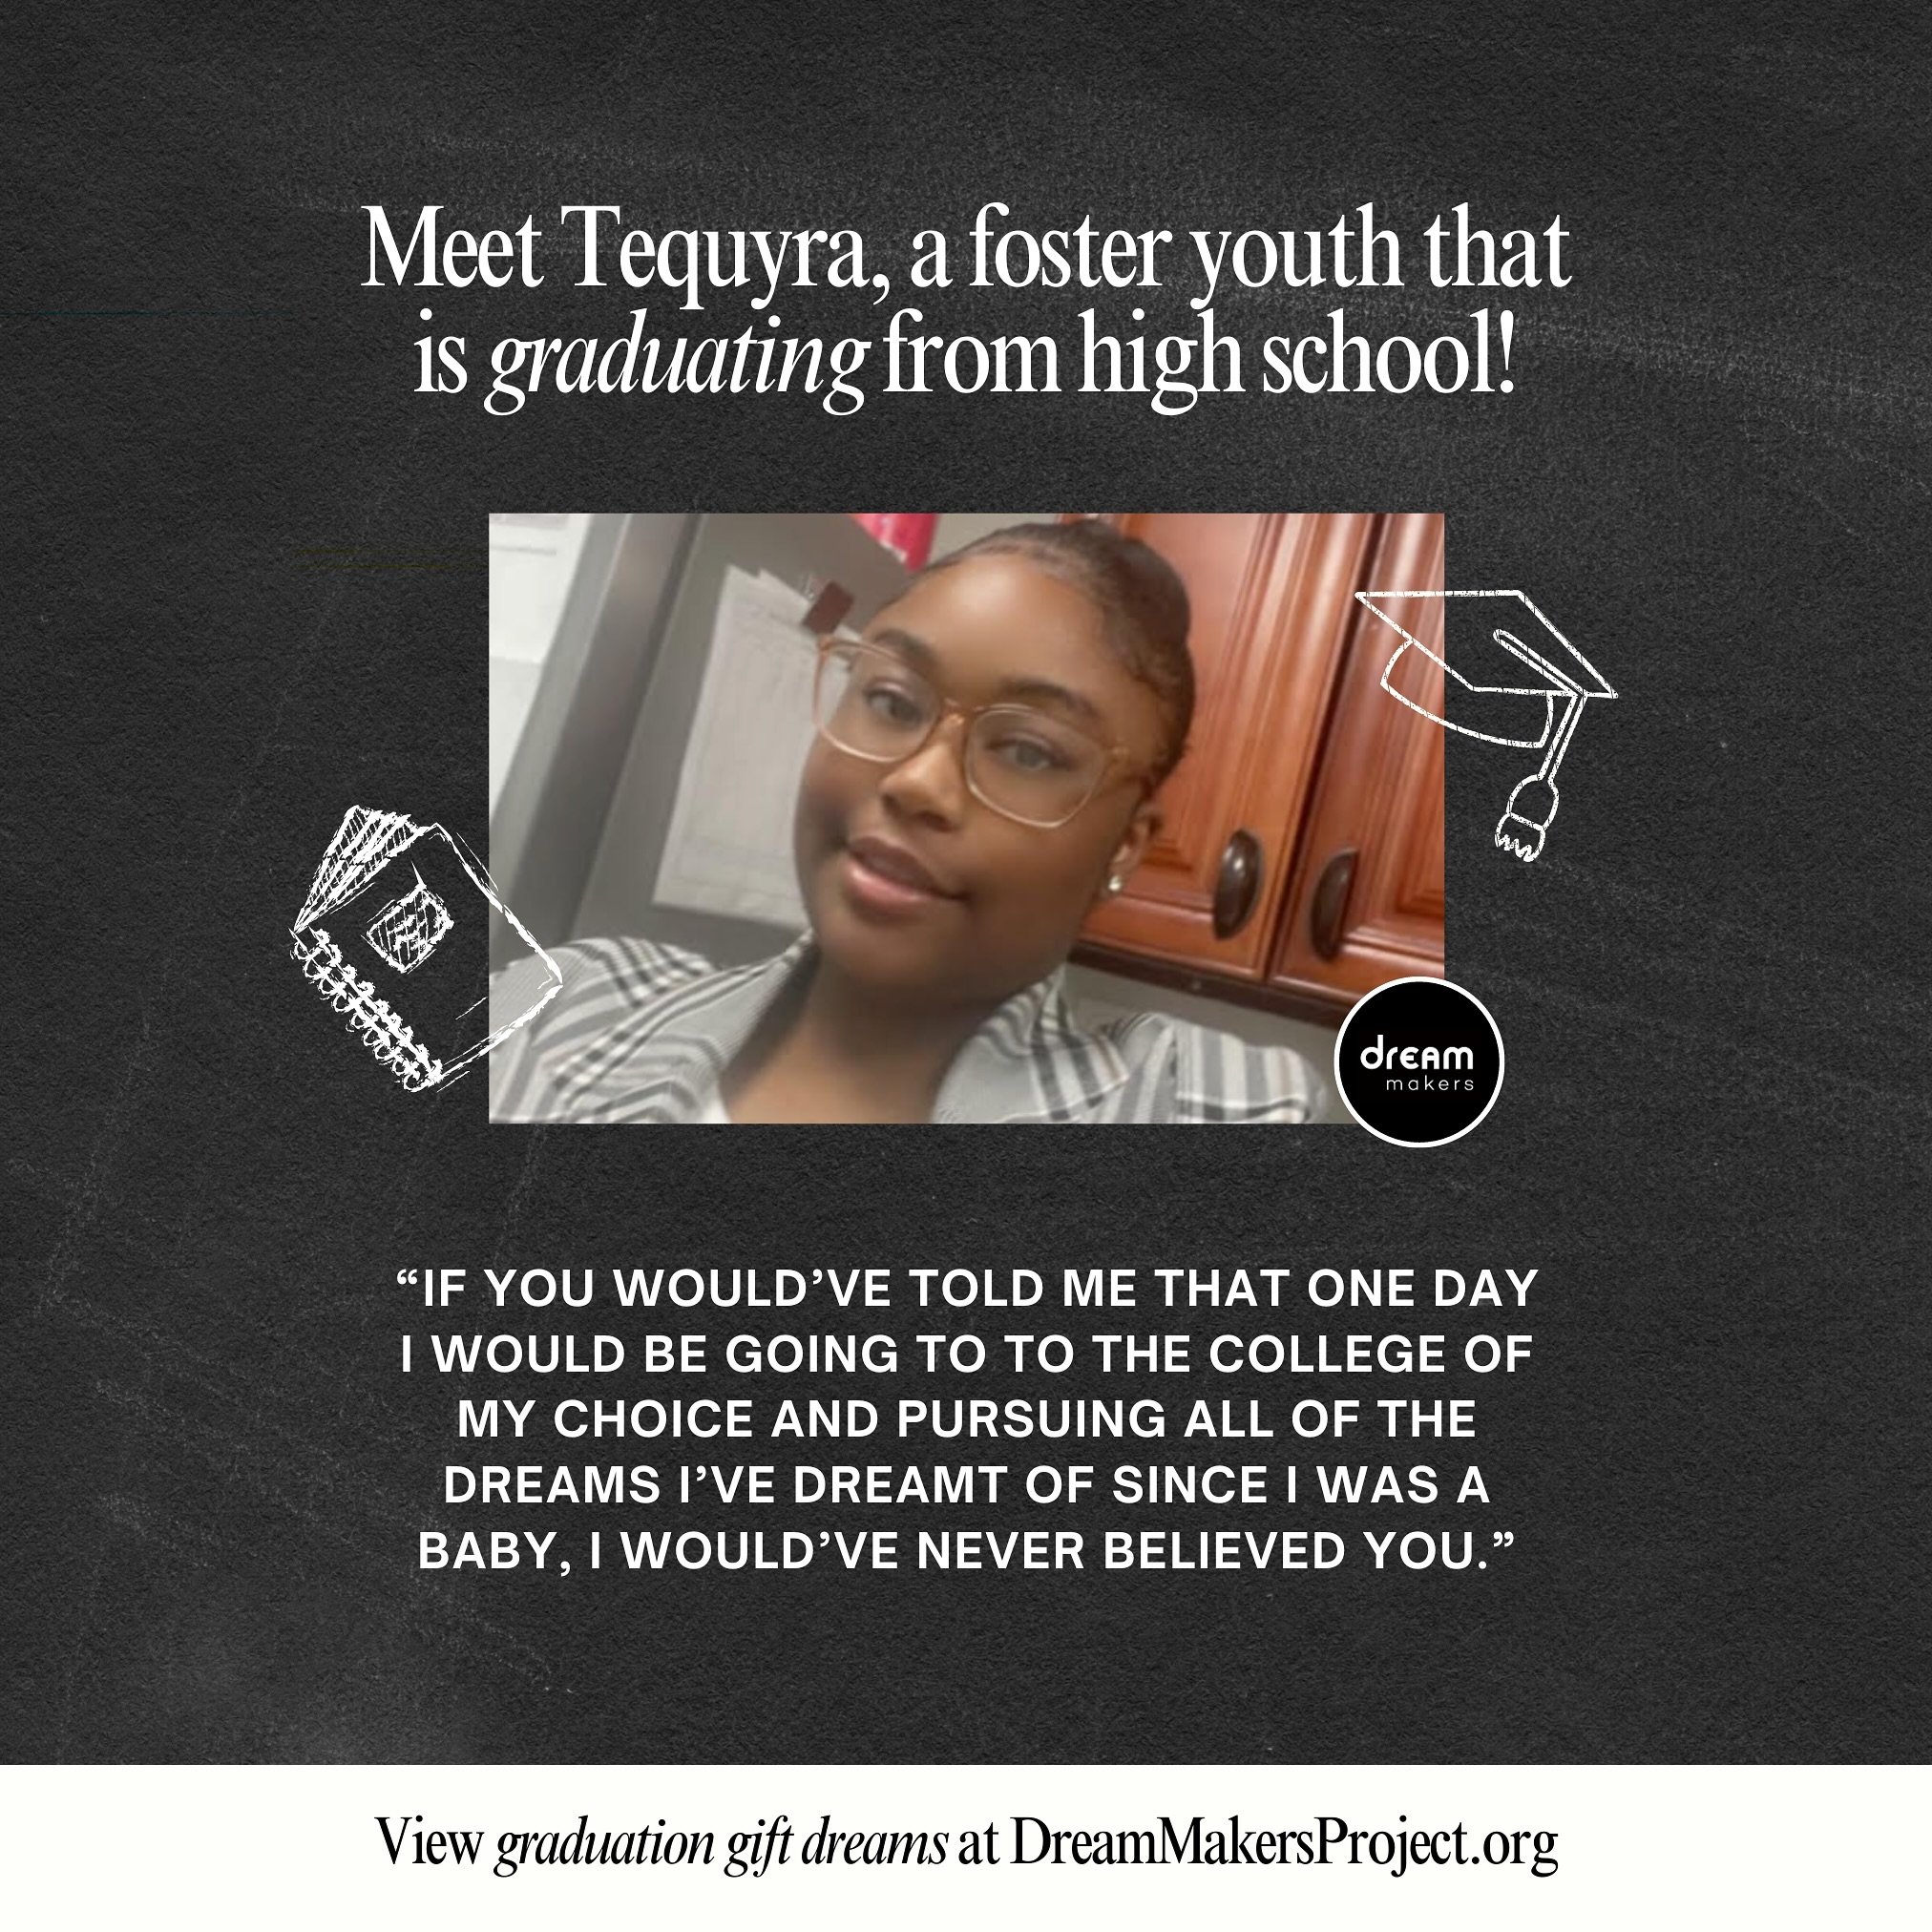 Tequyra dreams of a graduation gift of items for her dorm room.  She shared, &ldquo;If I didn&rsquo;t keep telling myself, and dreaming, and believing, I would never have made it this far. And if I don&rsquo;t keep imagining and creating, I will neve